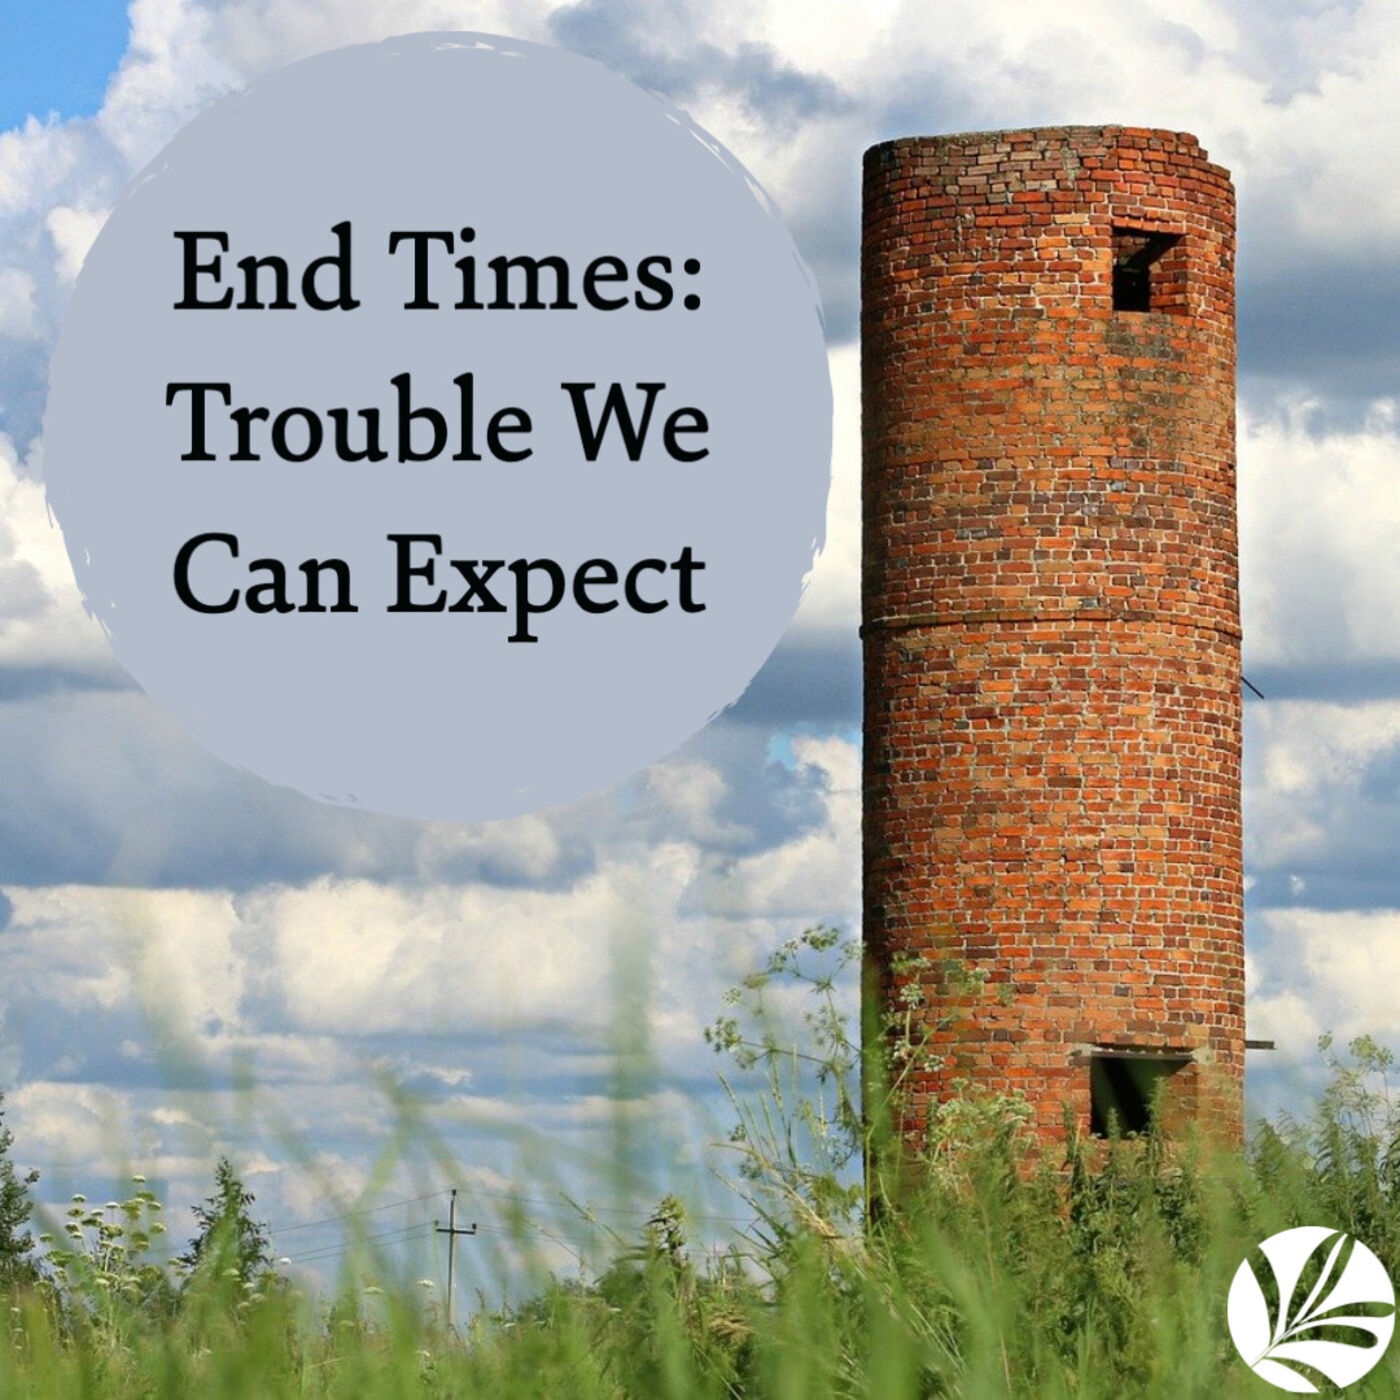 End Times: Trouble We Can Expect